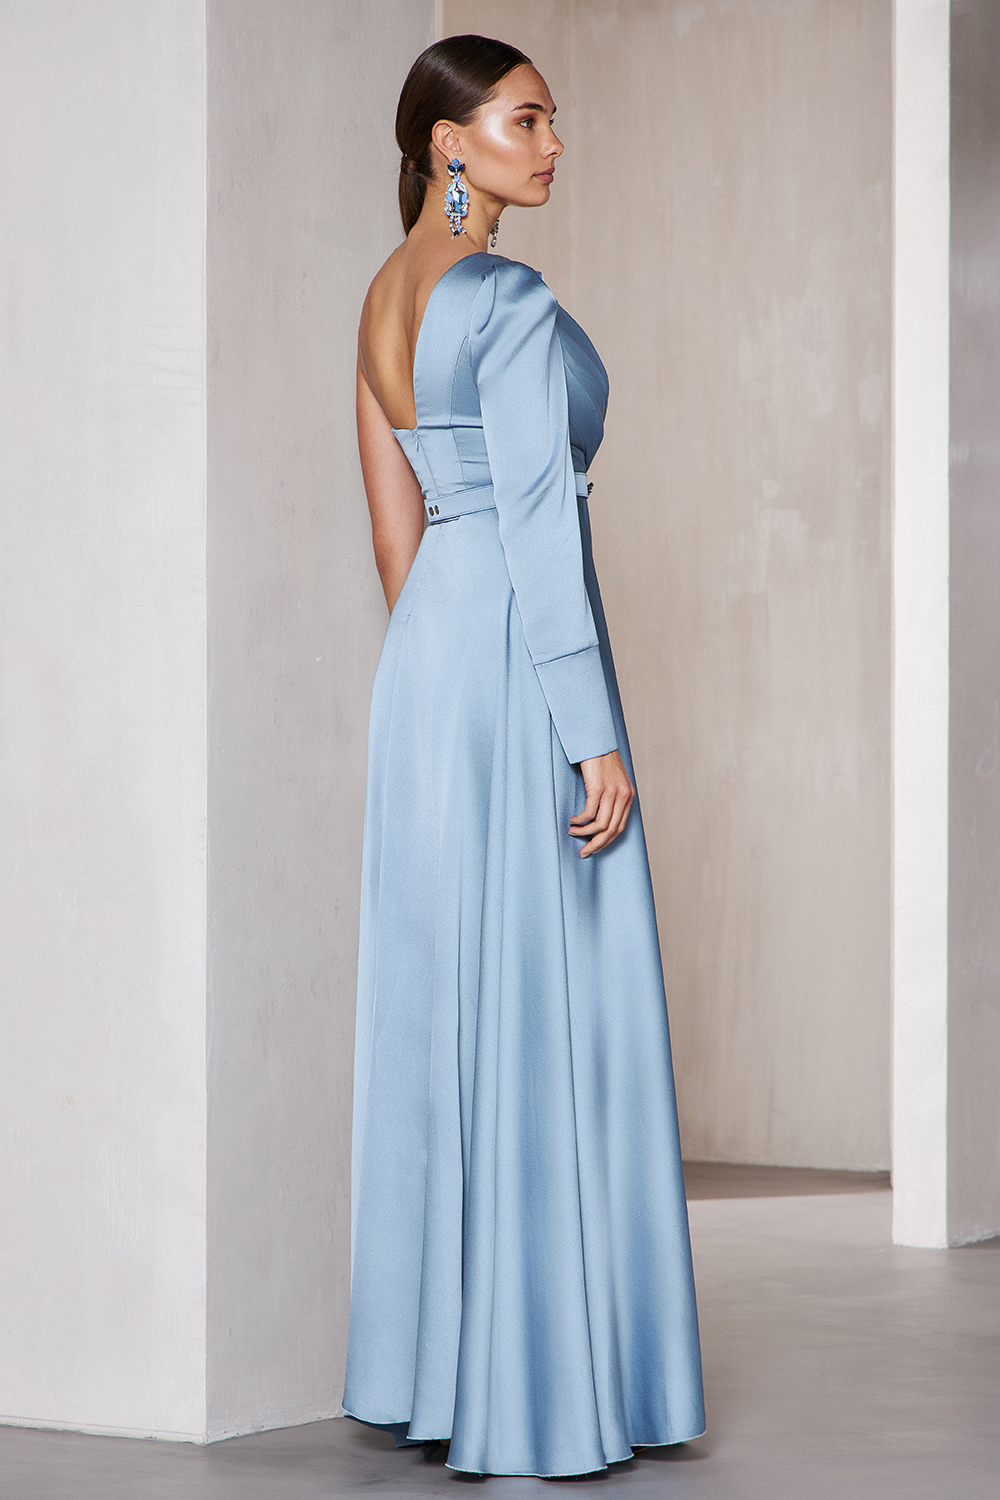 One shoulder cocktail long satin dress with long sleeve and belt at the waist